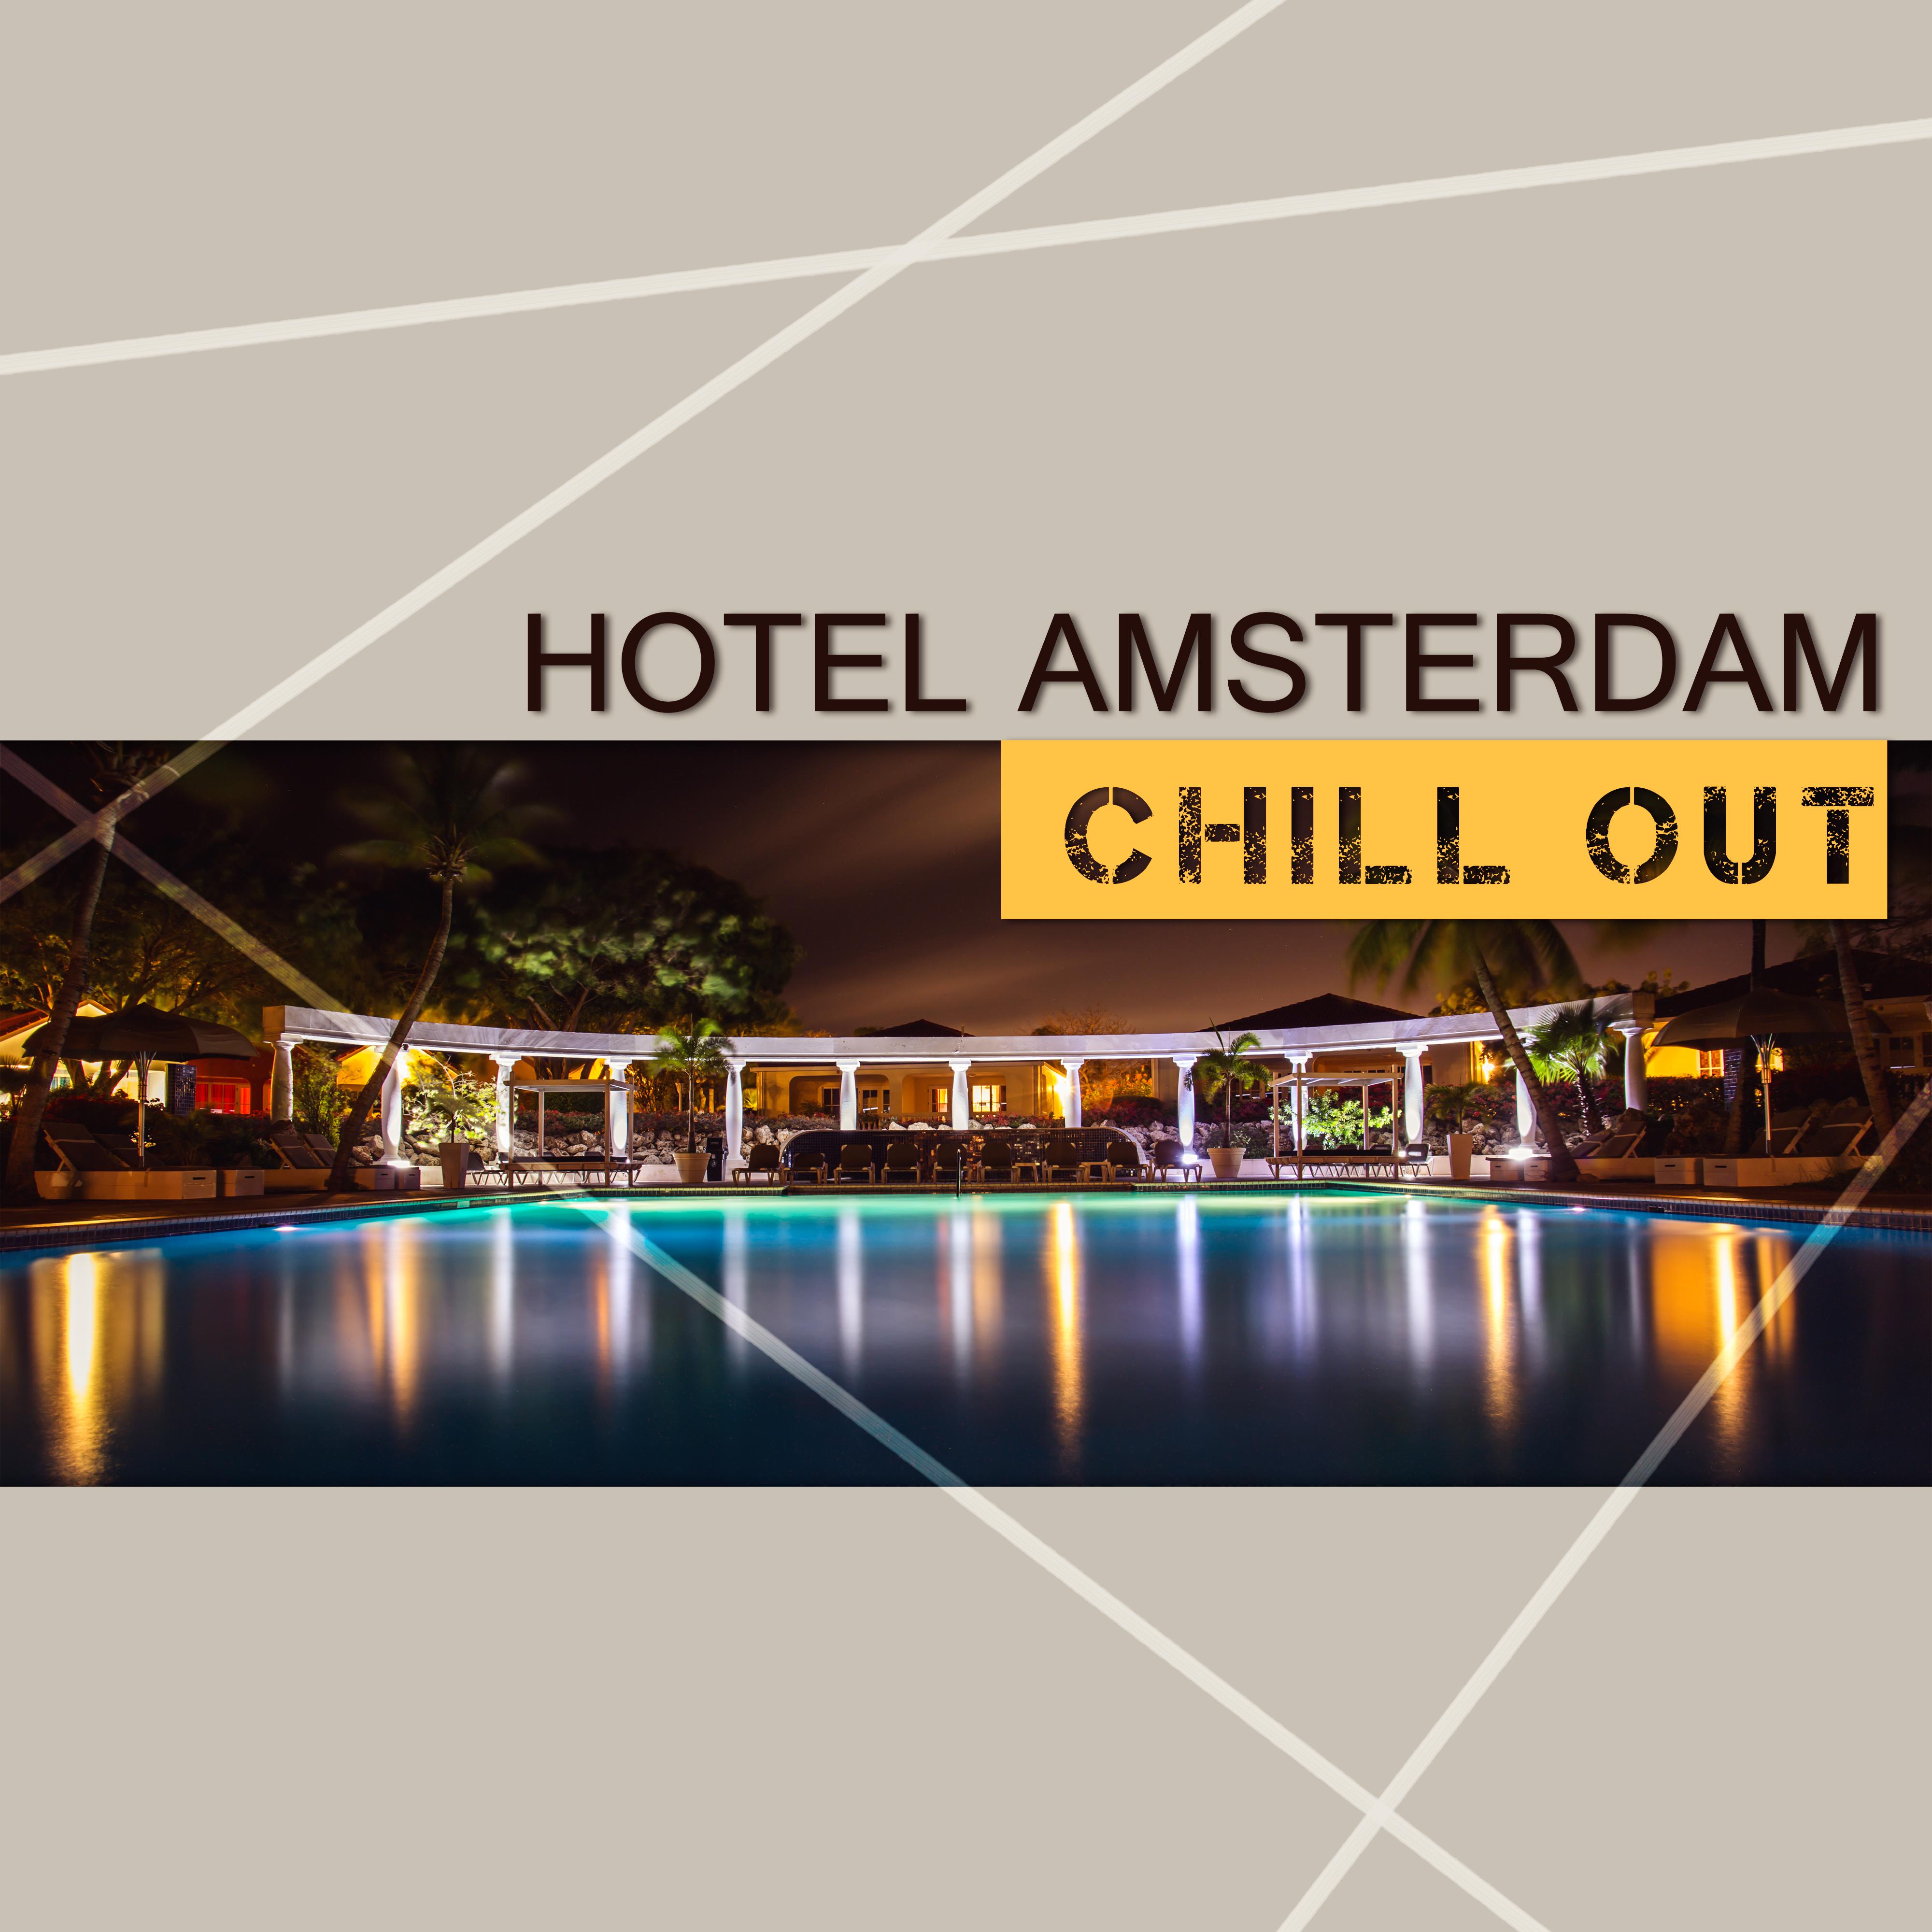 Hotel Amsterdam Chill Out – Pure Chill Out Music, Chill Out Lounge, Chill Out Mix, Chill Out Lounge Summer, Step by Step Toward the Sun